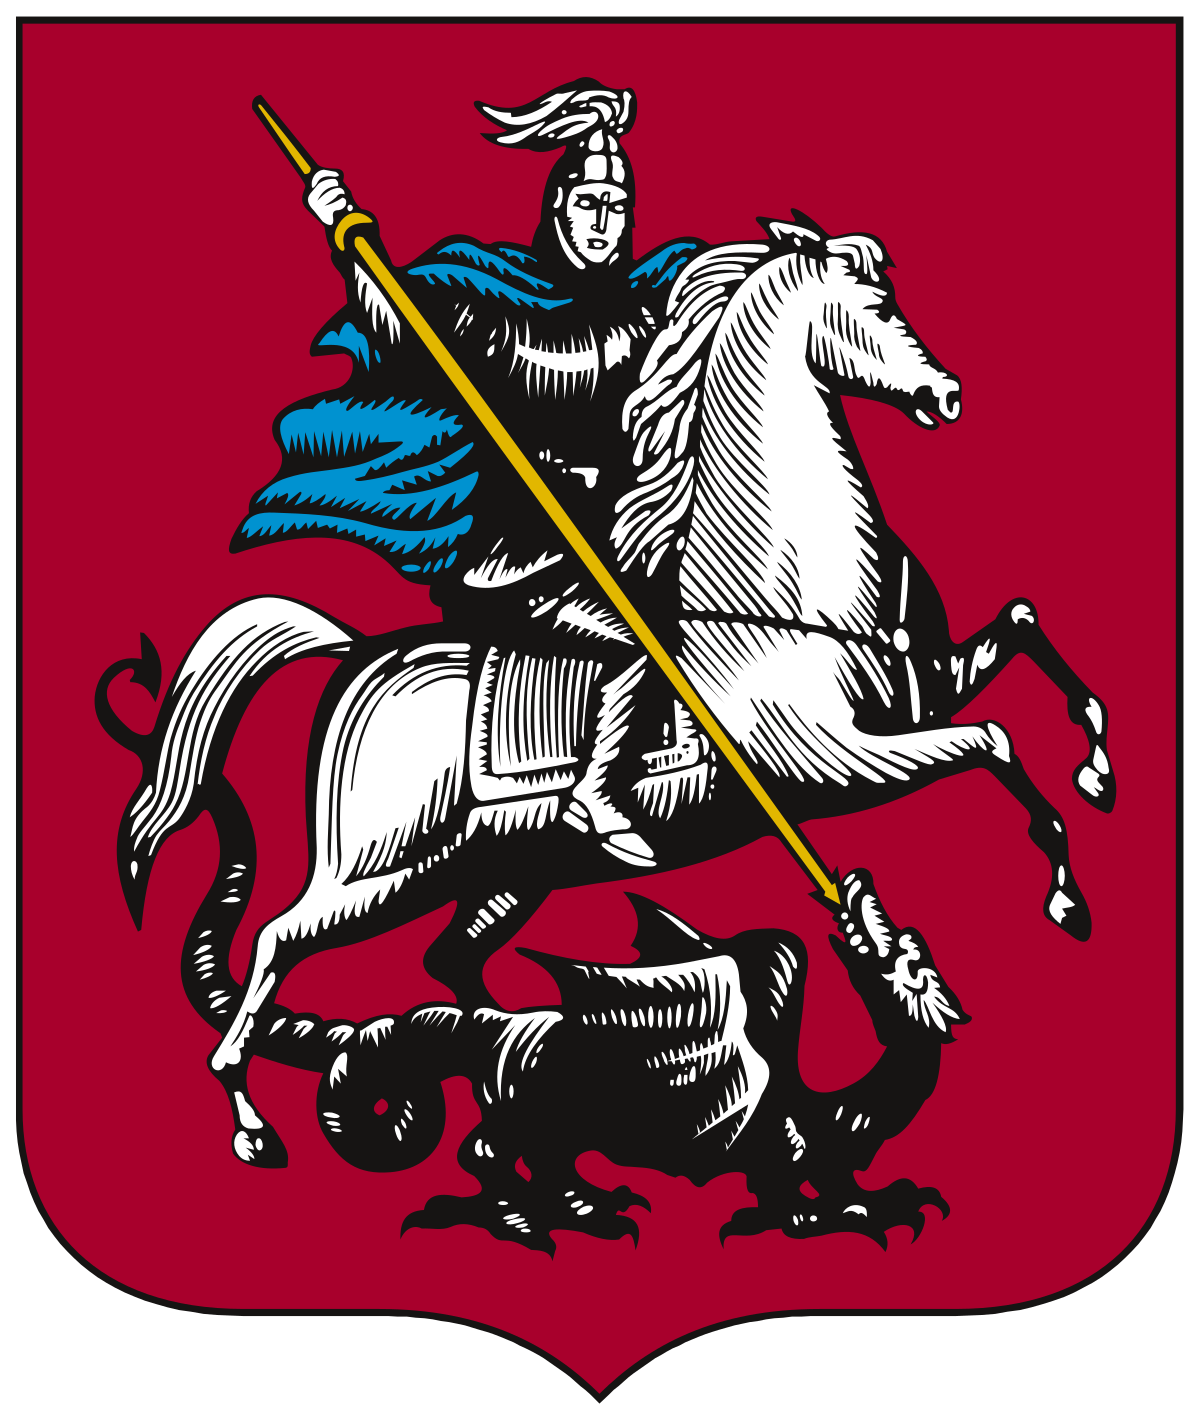 1200px-Coat_of_Arms_of_Moscow.svg.png